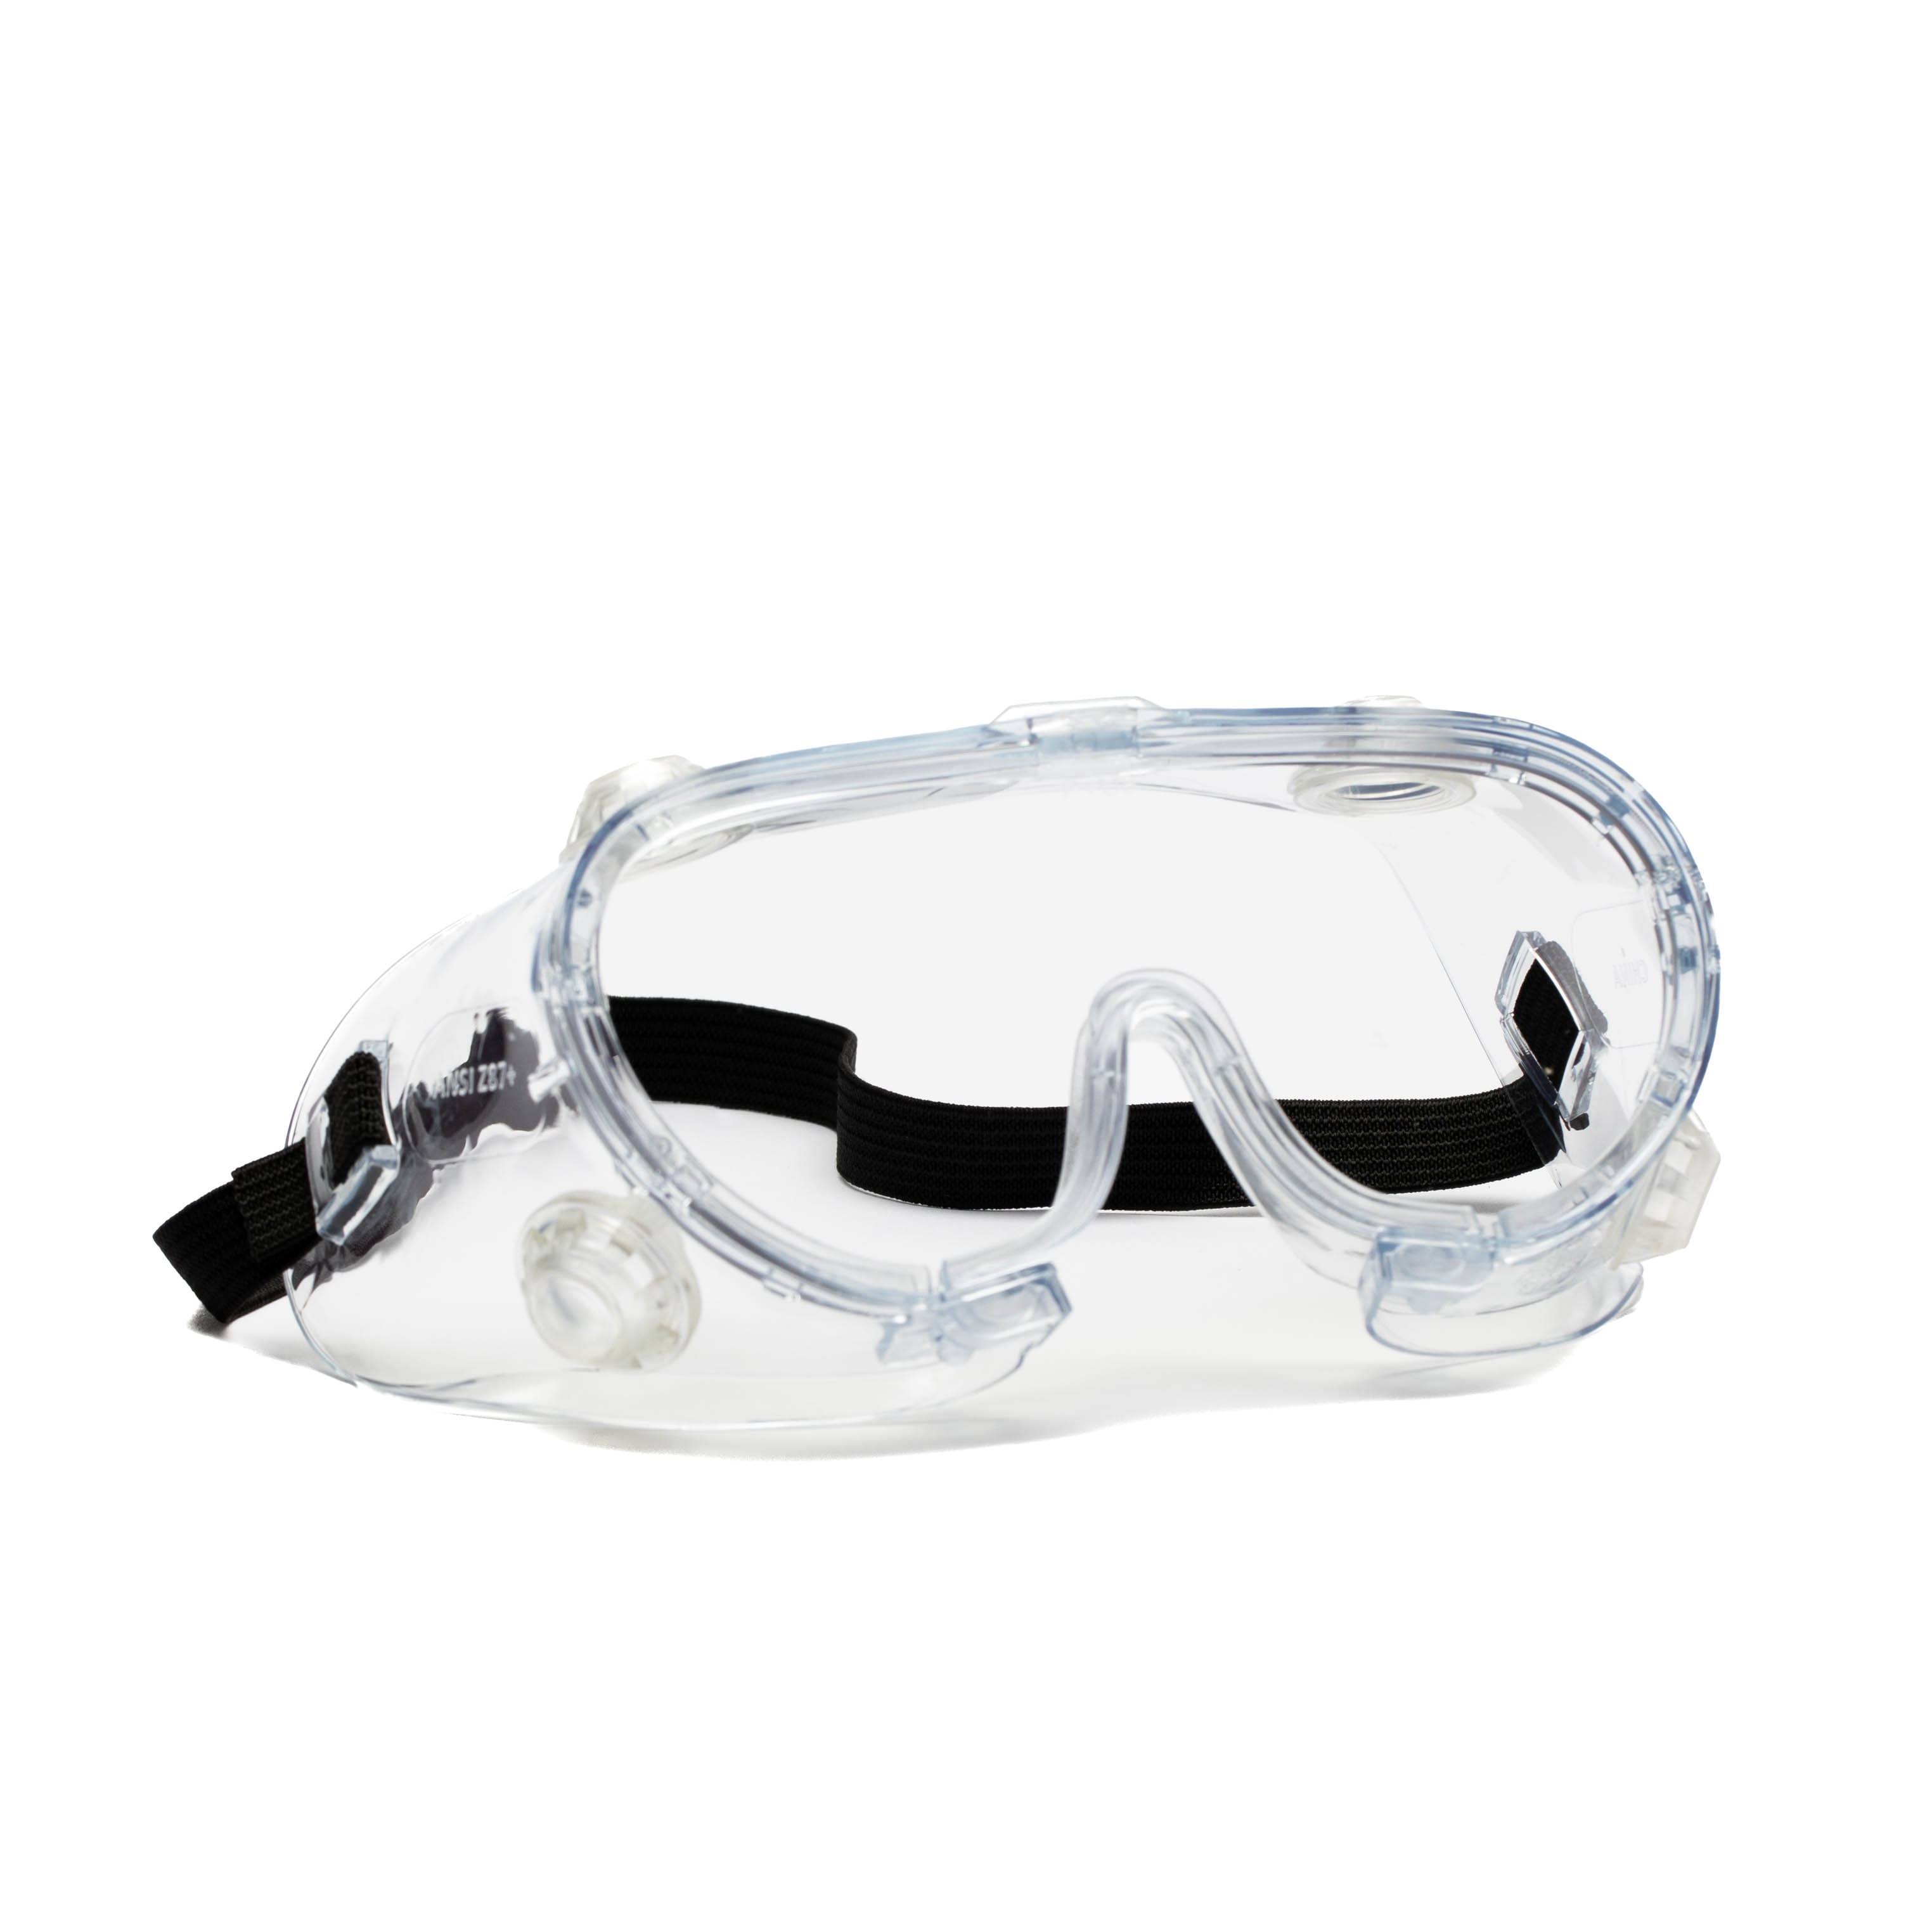 makesy Scratch-Resistant Safety Goggles